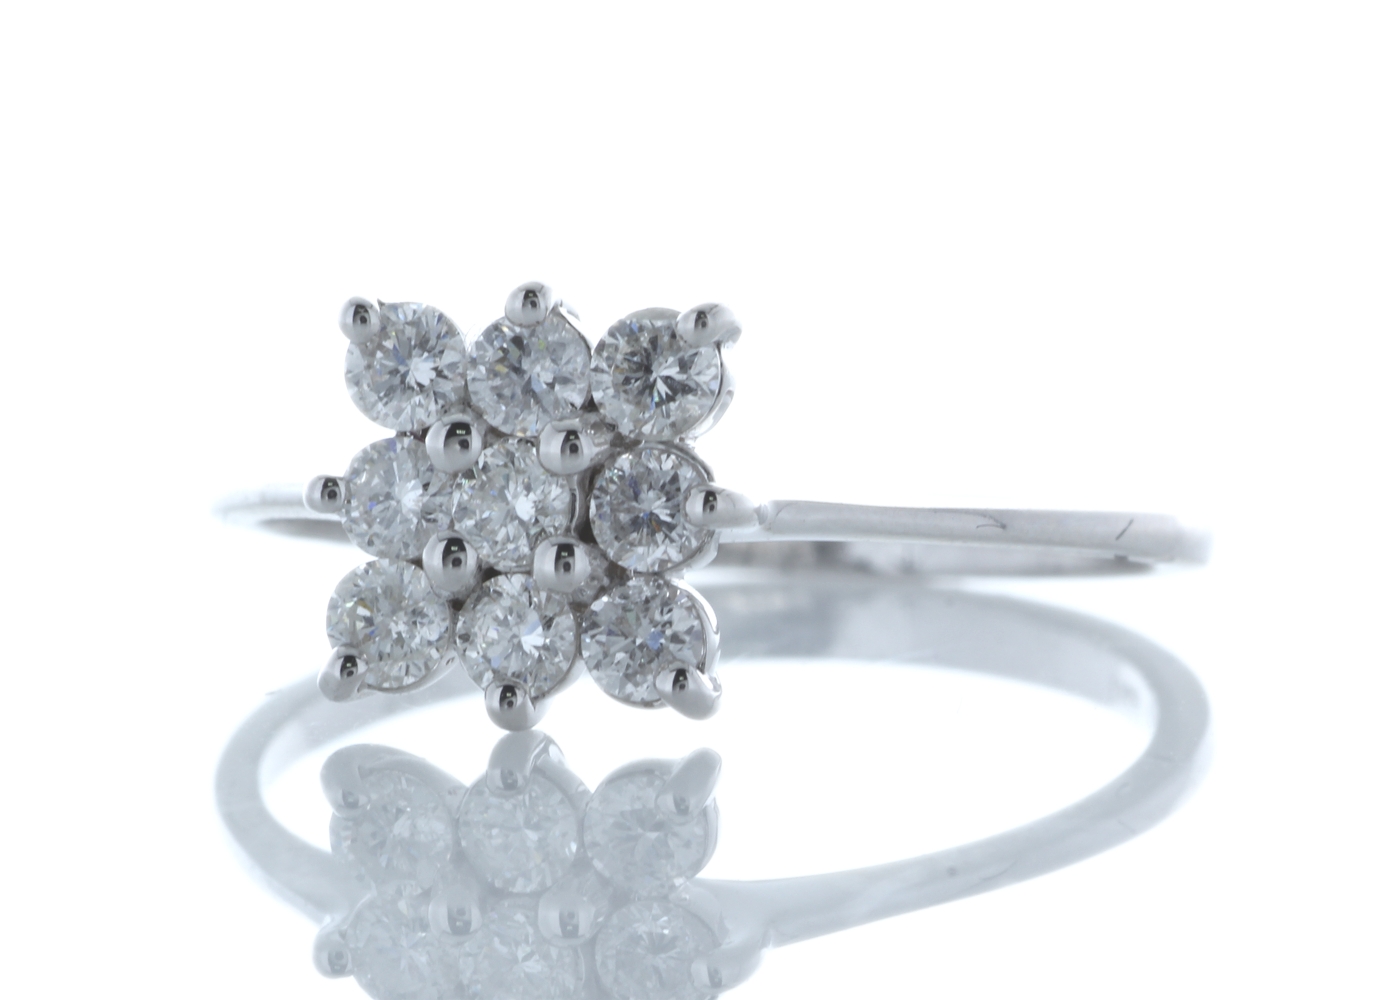 18k White Gold Fancy Cluster Diamond Ring 0.45 Carats - Image 2 of 4